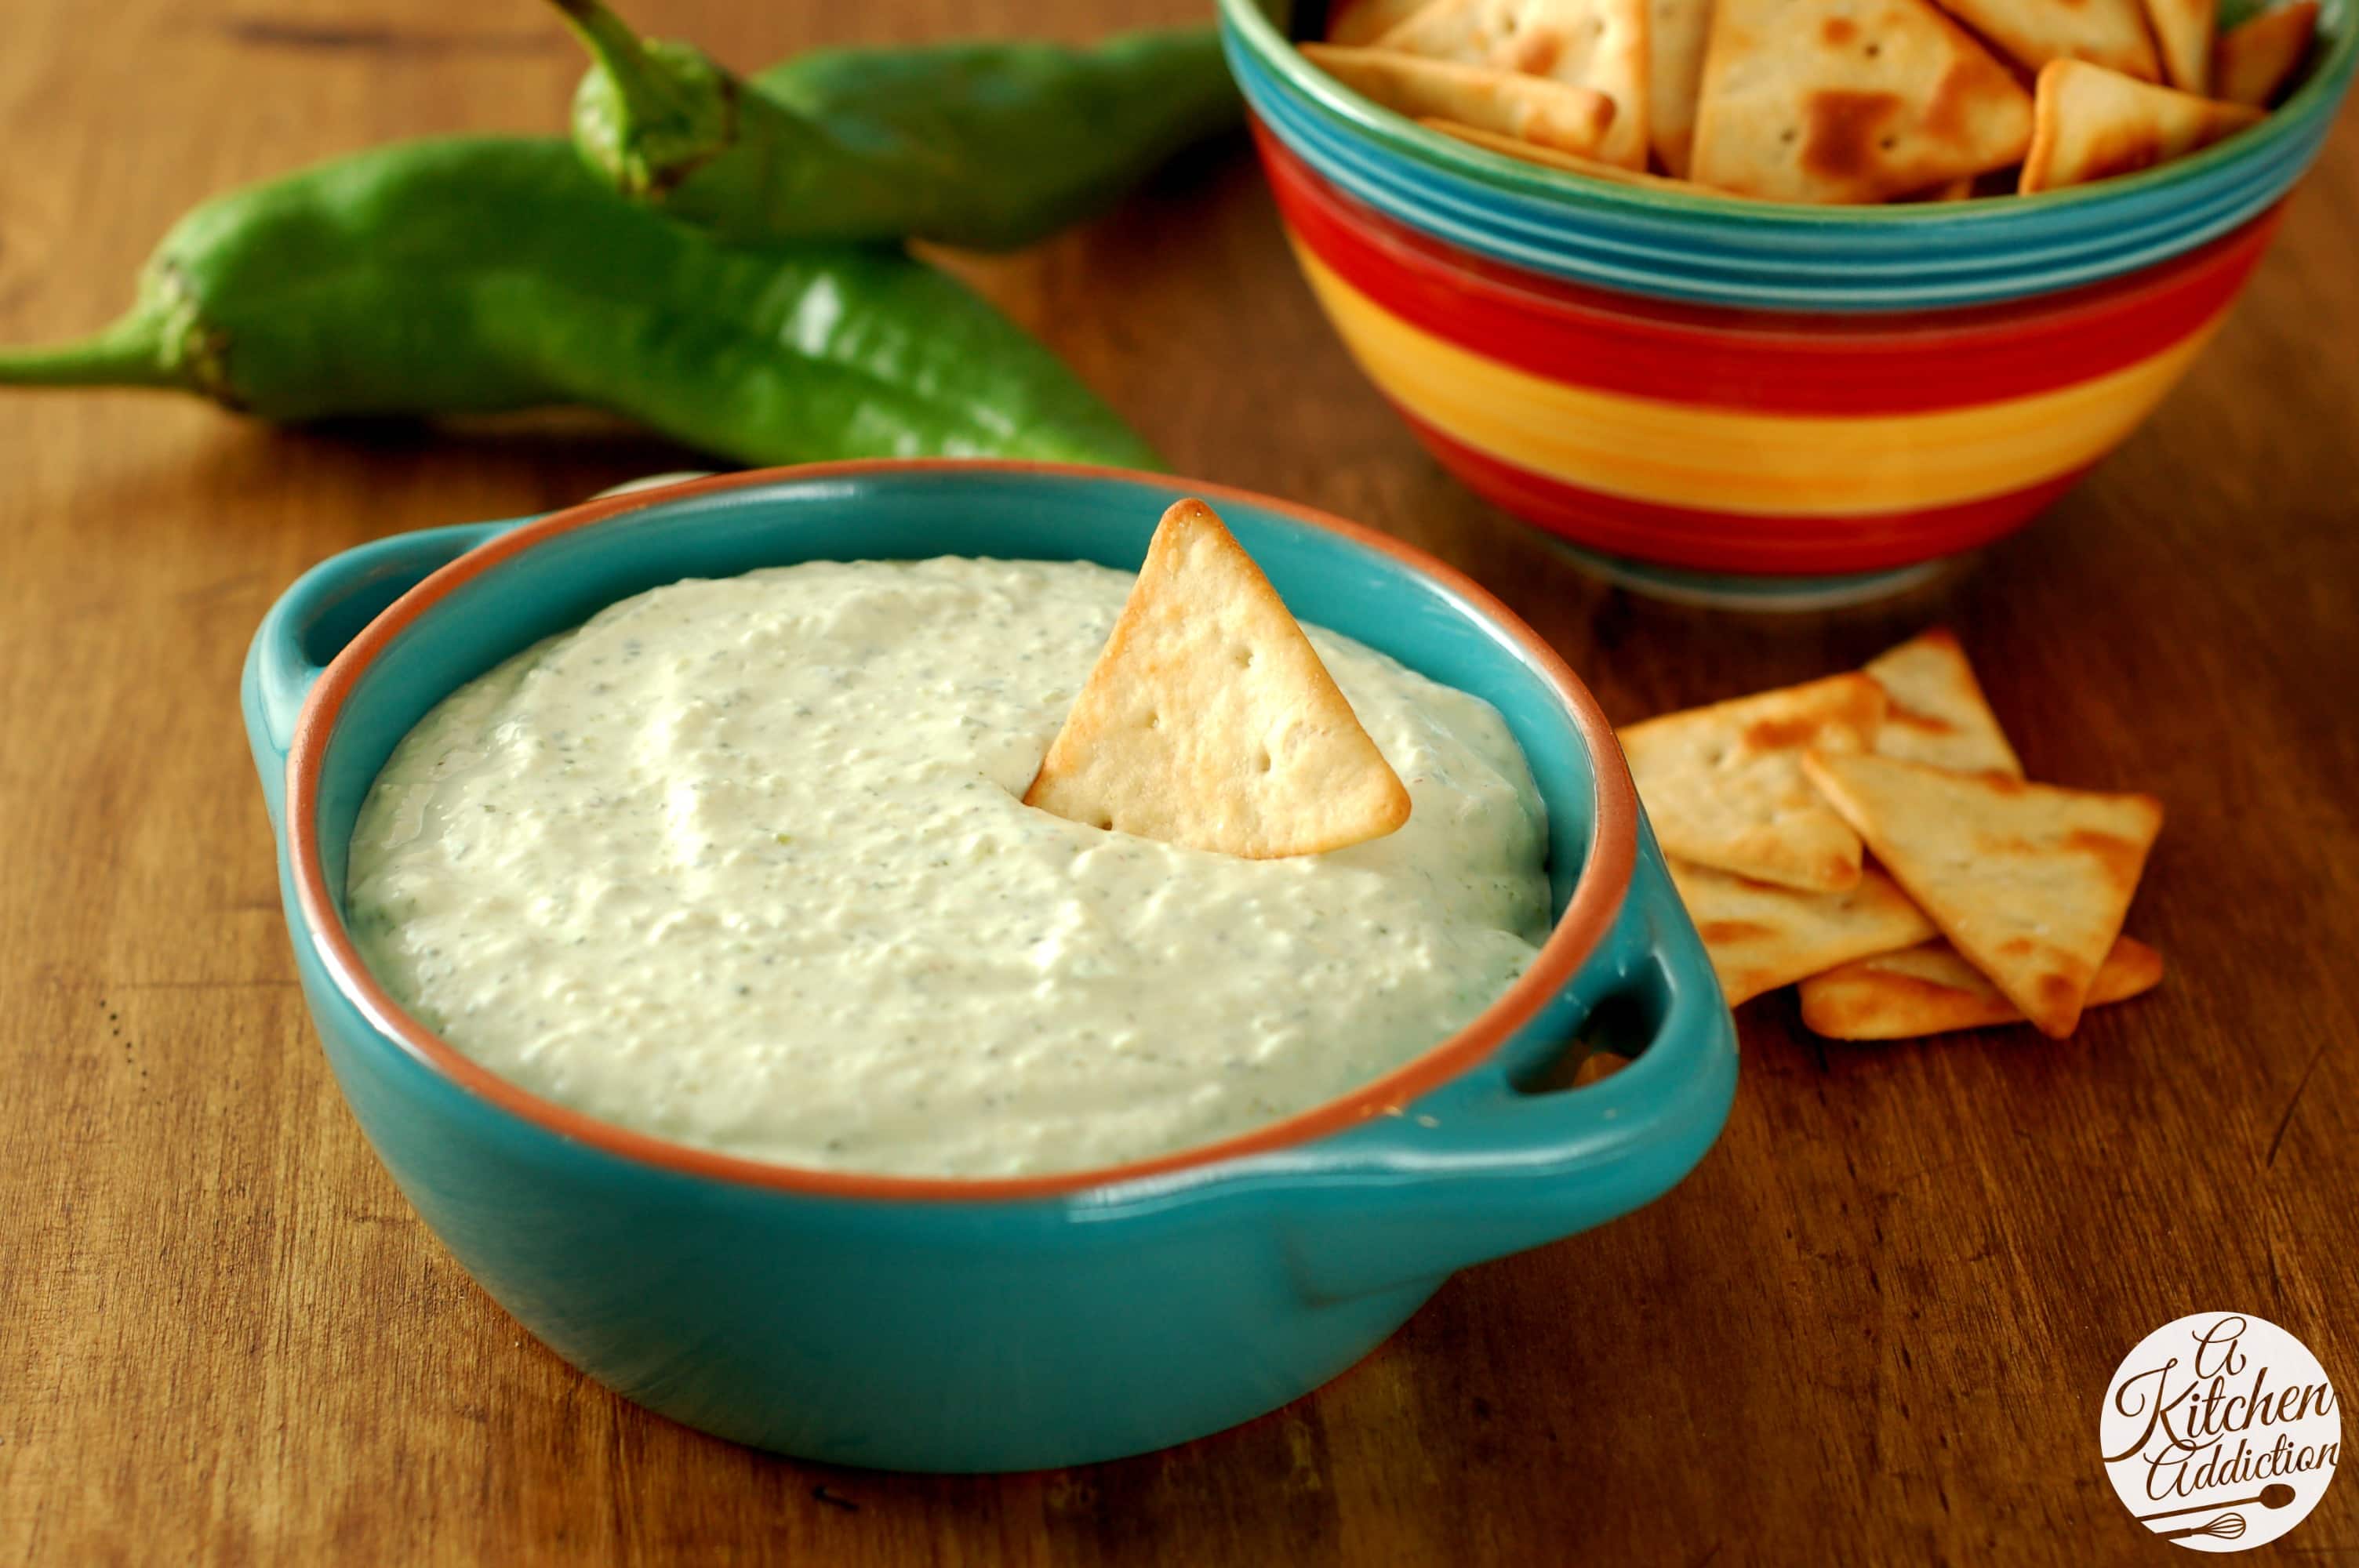 Creamy Roasted Hatch Chile Dip - A Kitchen Addiction